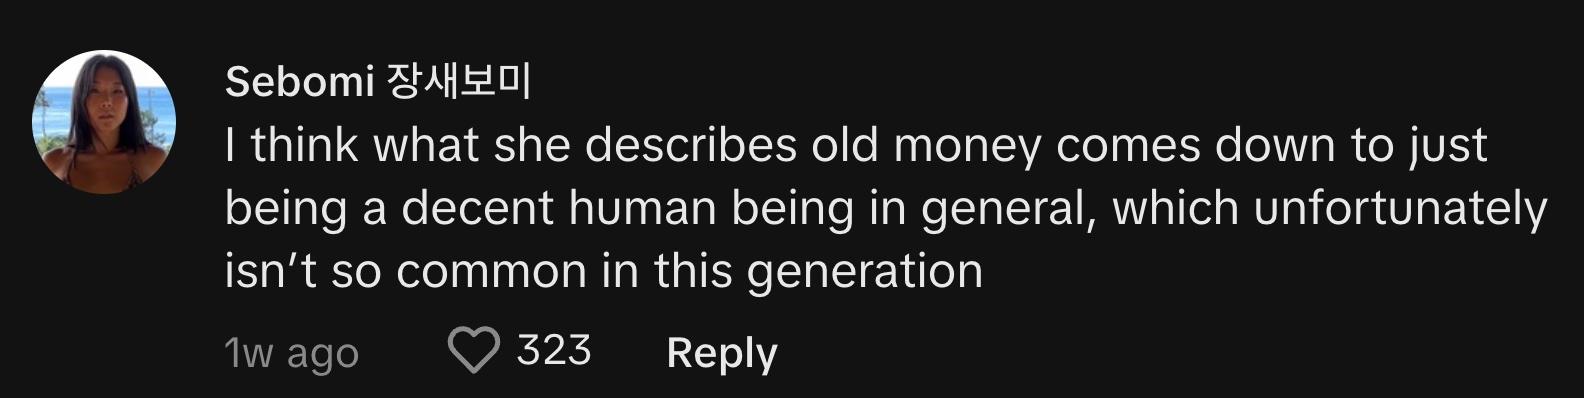 TikToker @sebomijang commented, "I think what she describes old money comes down to just being a decent human being in general, which unfortunately isn't so common in this generation."